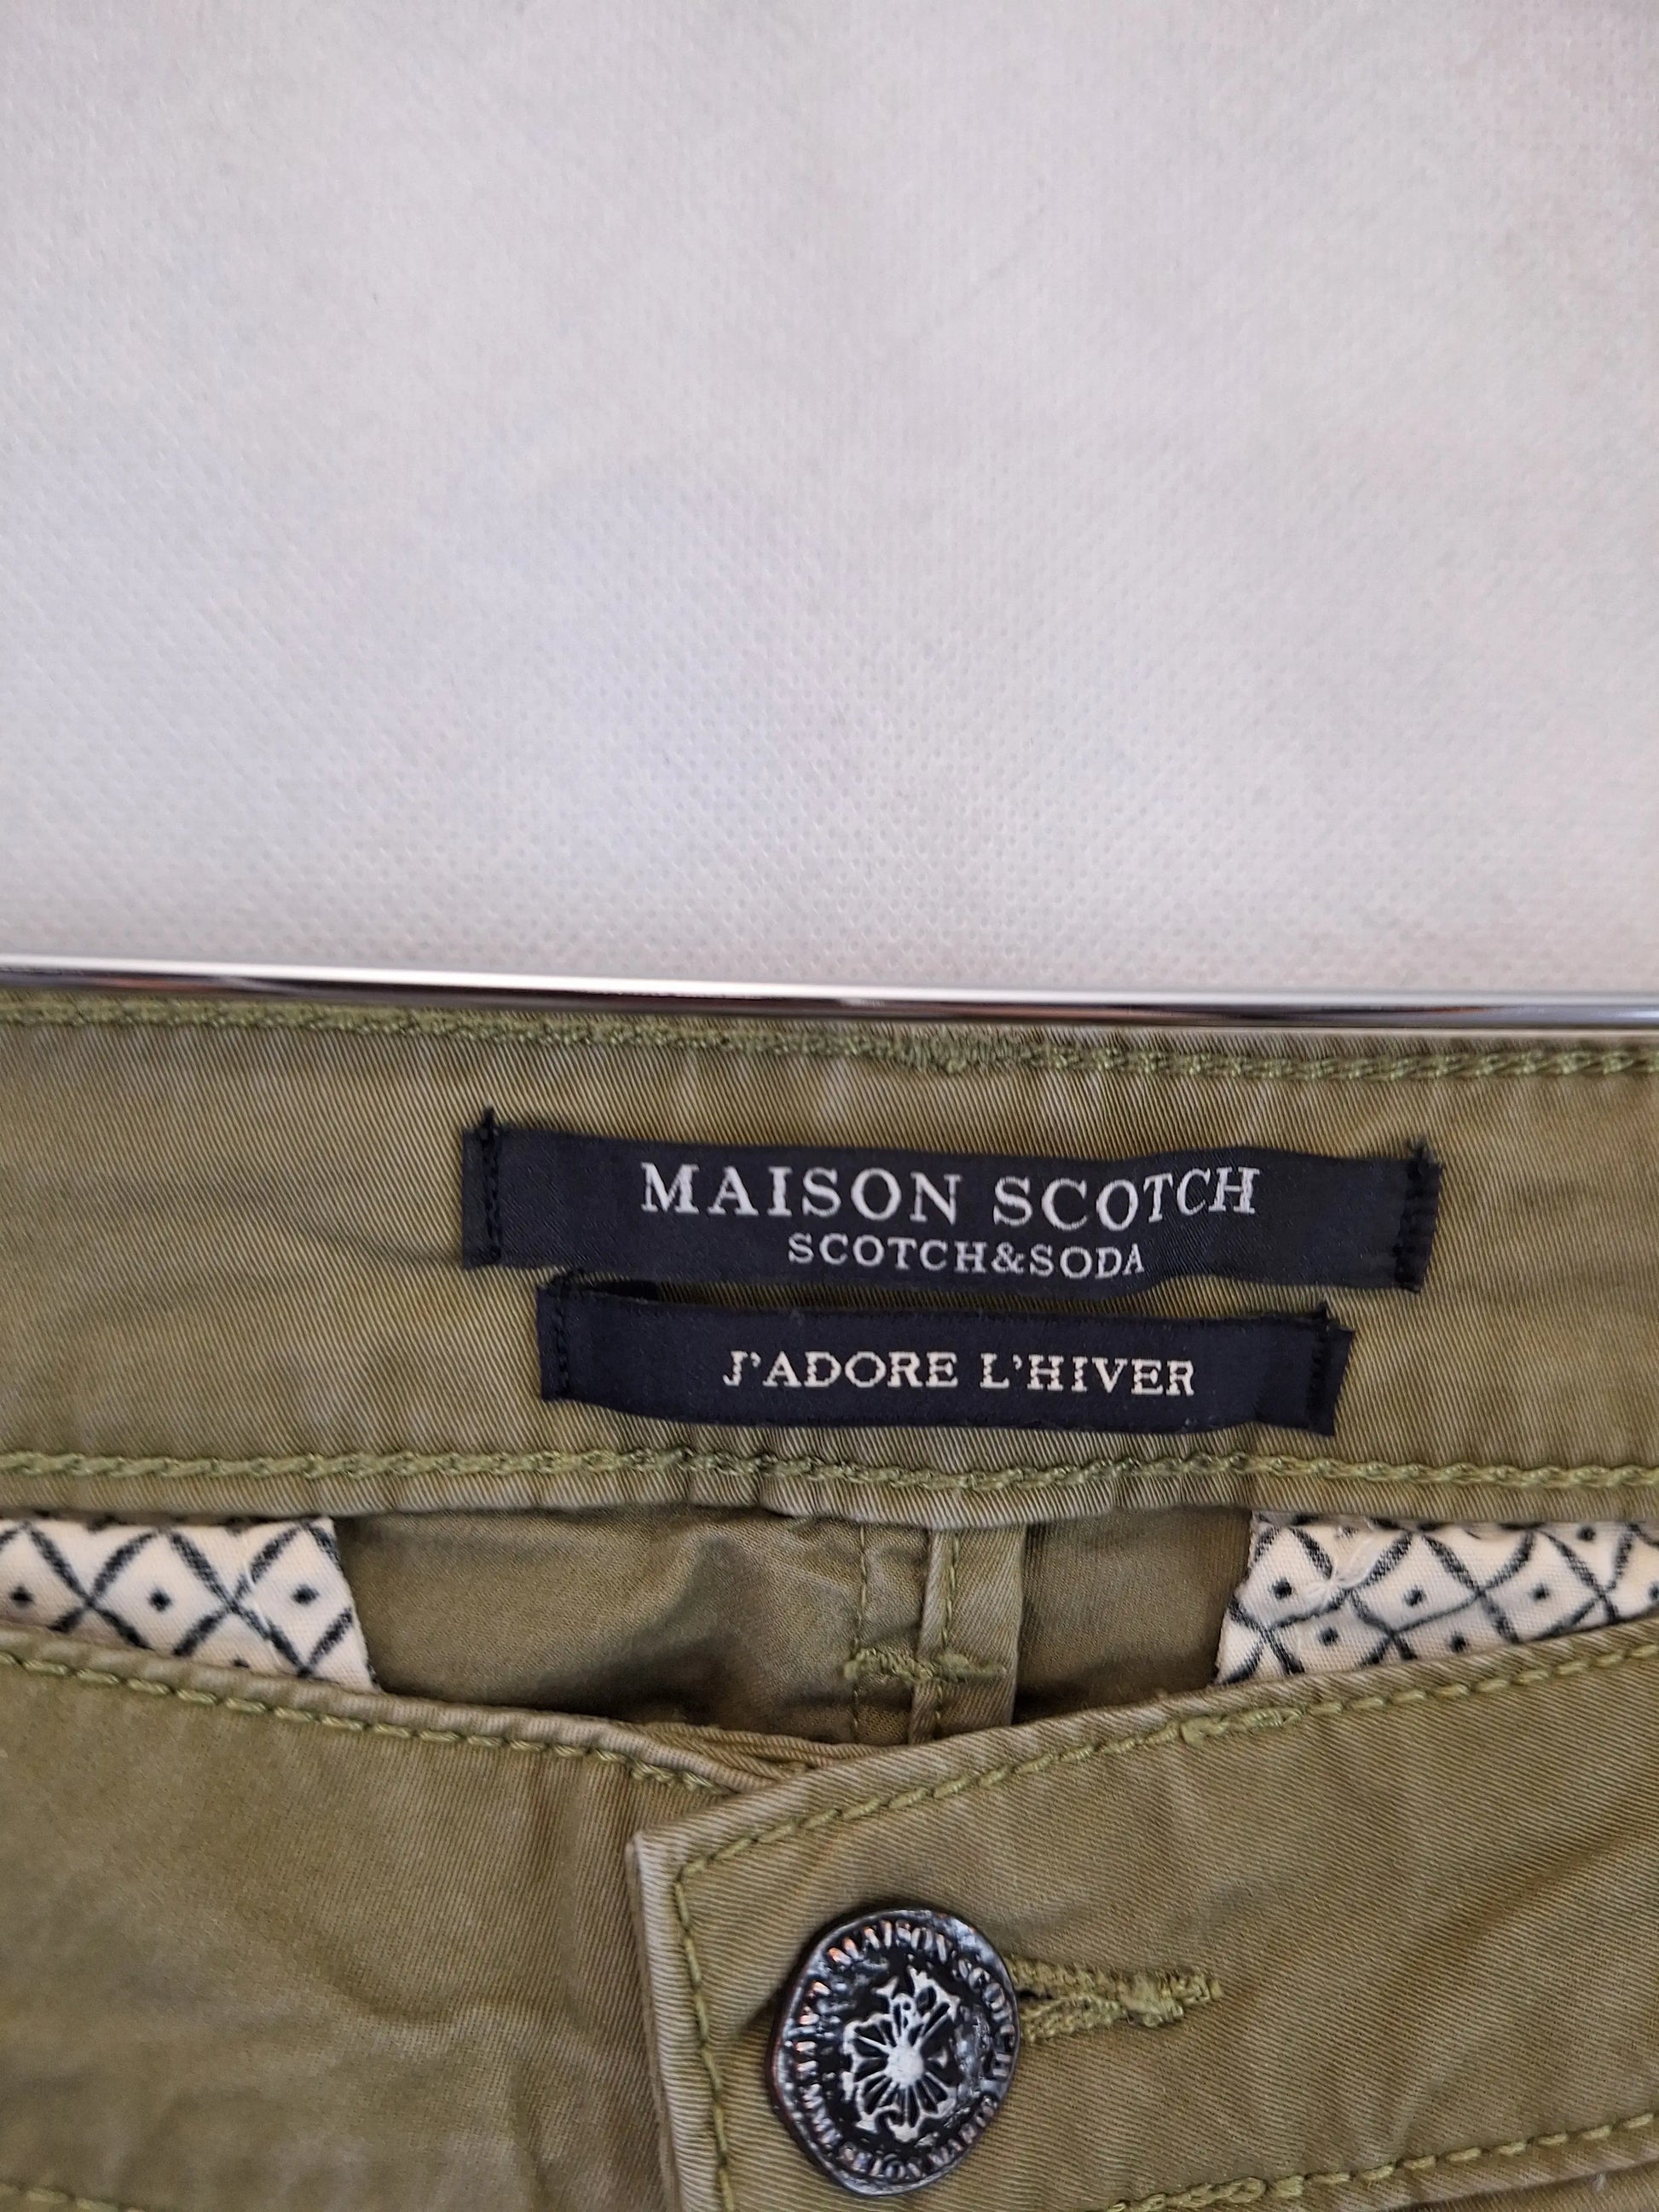 Scotch & Soda Essential Olive Chino Pants Size S by SwapUp-Online Second Hand Store-Online Thrift Store